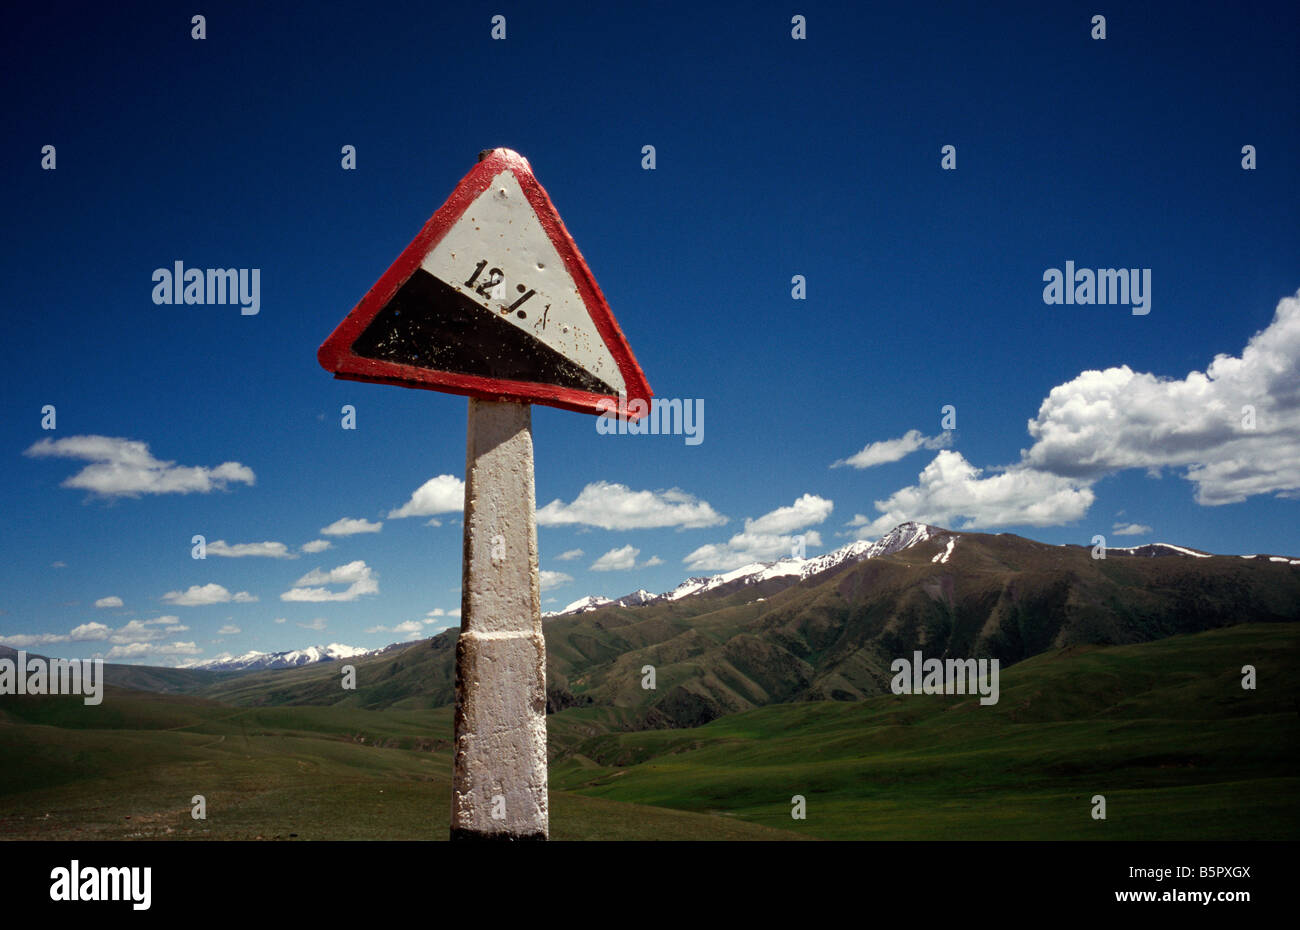 June 17, 2006 - Sign post on the road to Naryn in the Kyrgyz Tian Shan mountains. Stock Photo